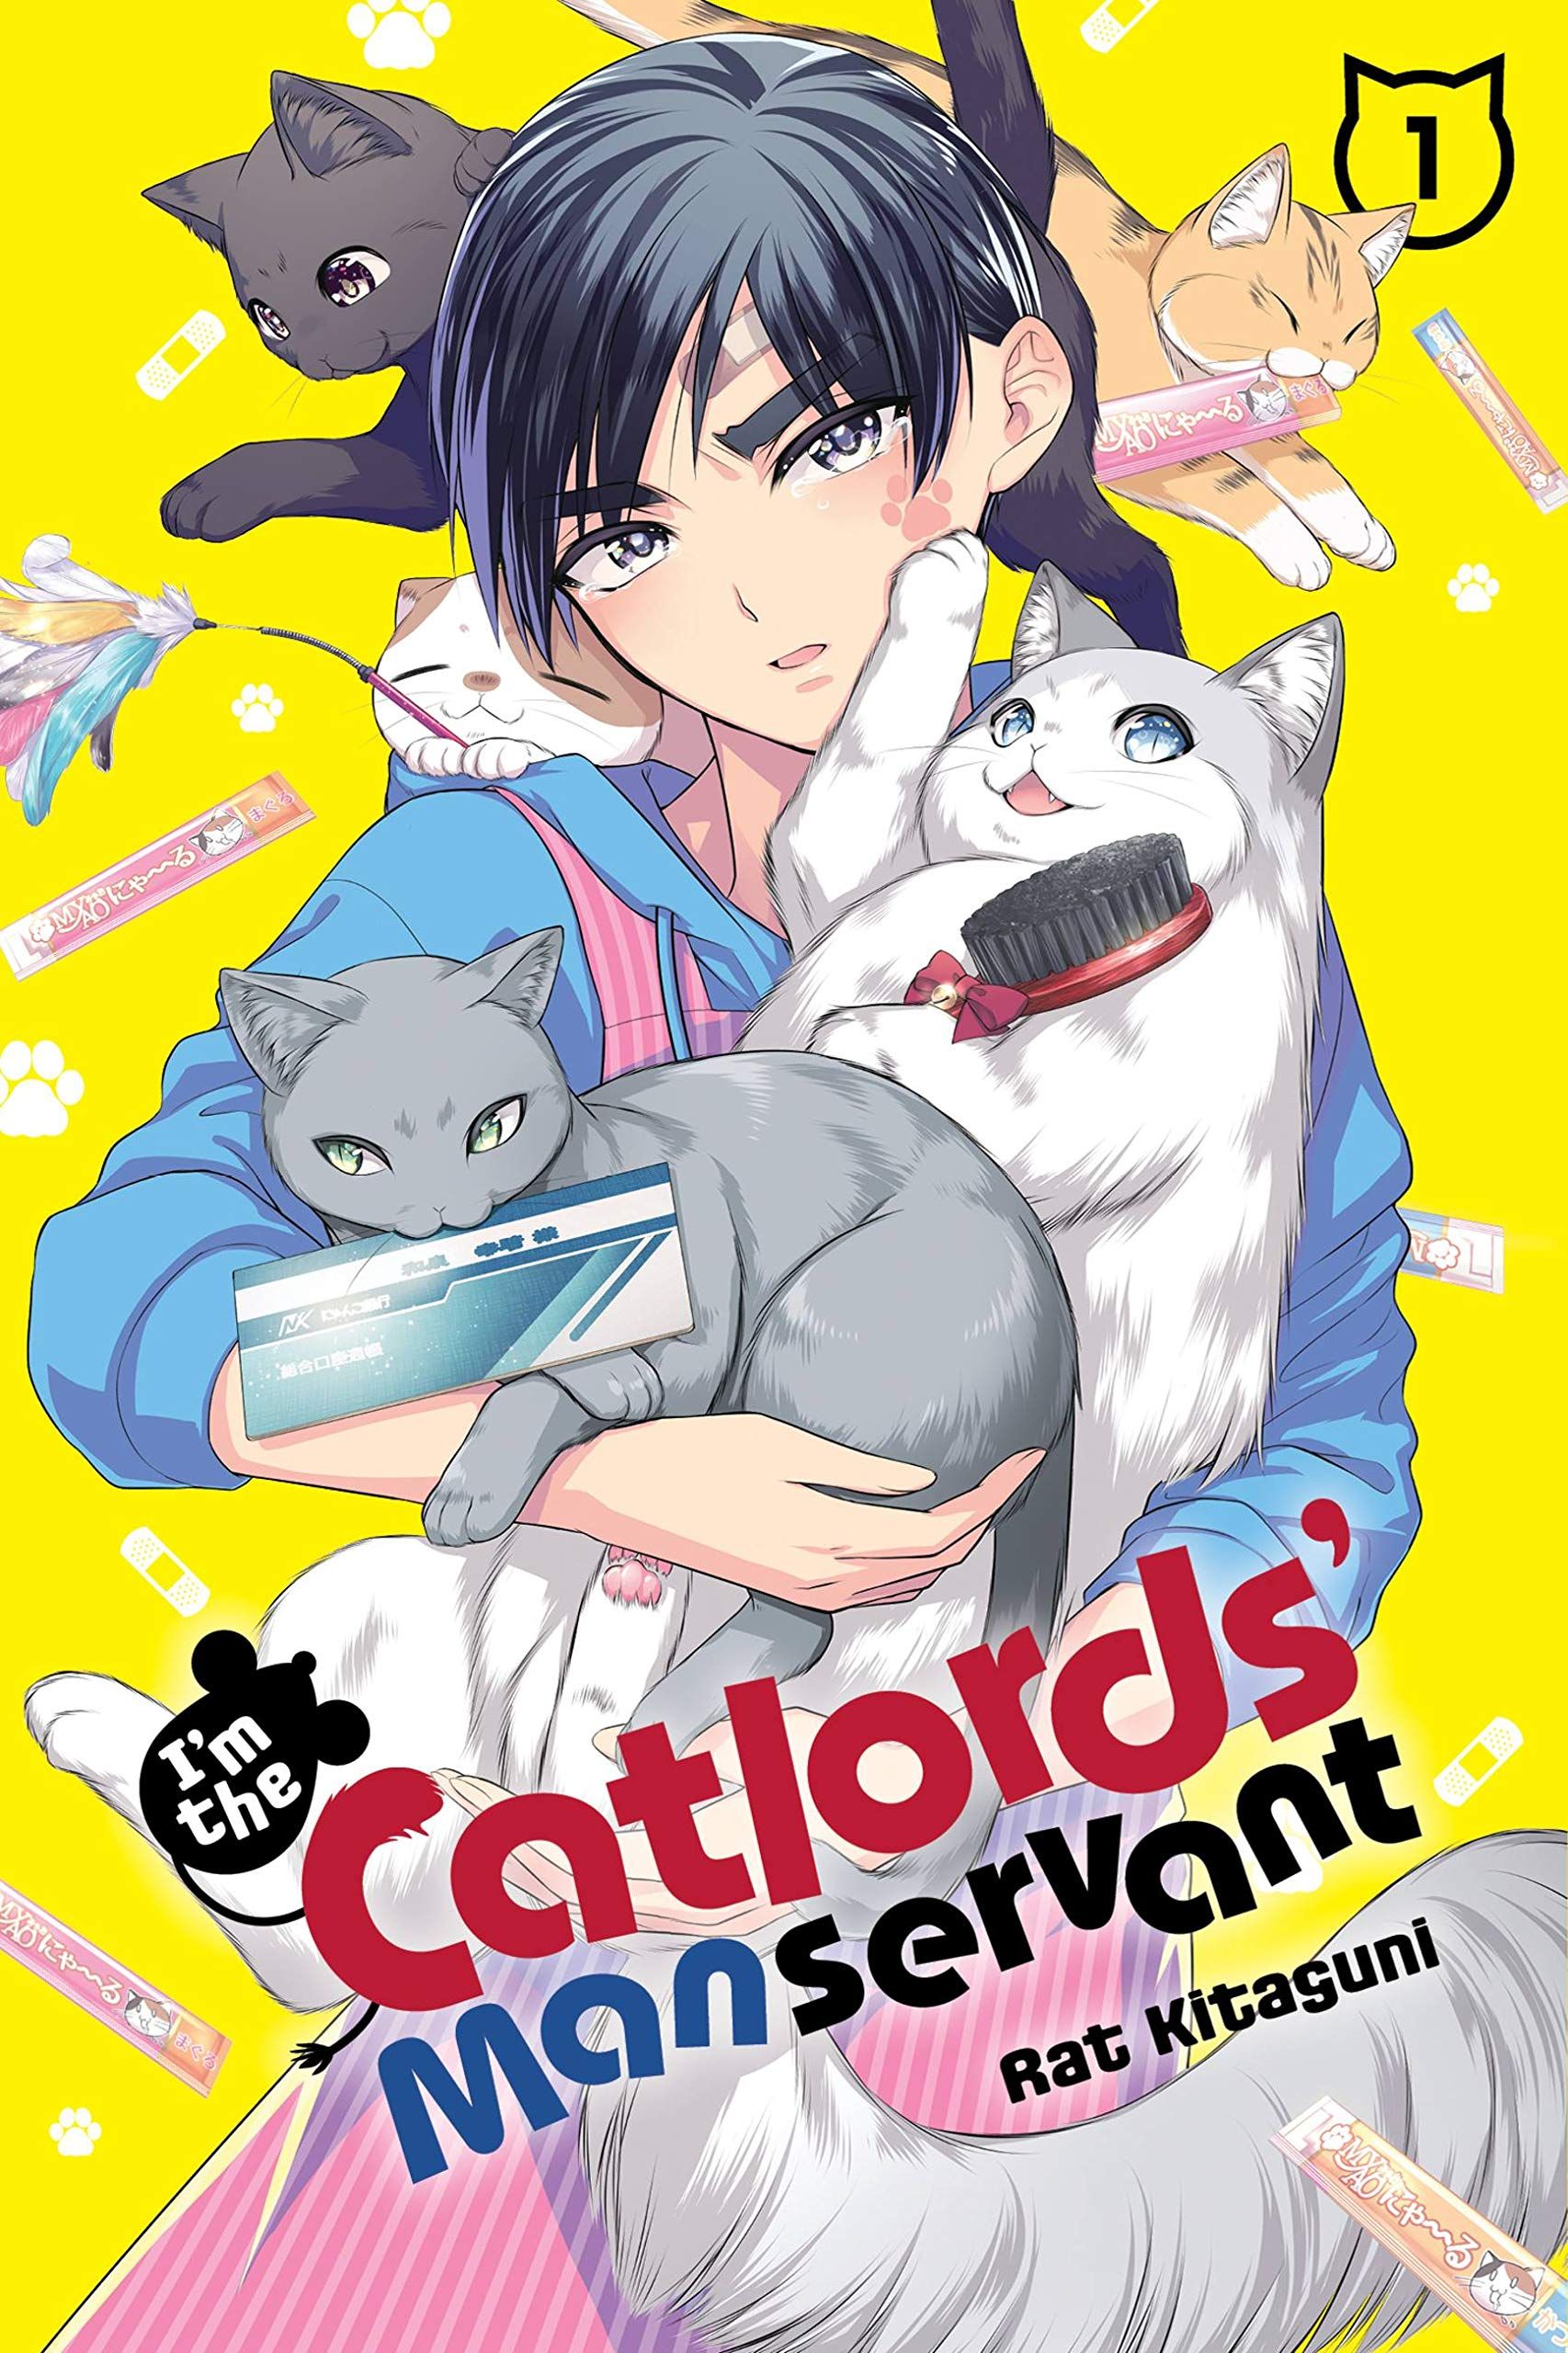 I'm the Catlord's Manservant